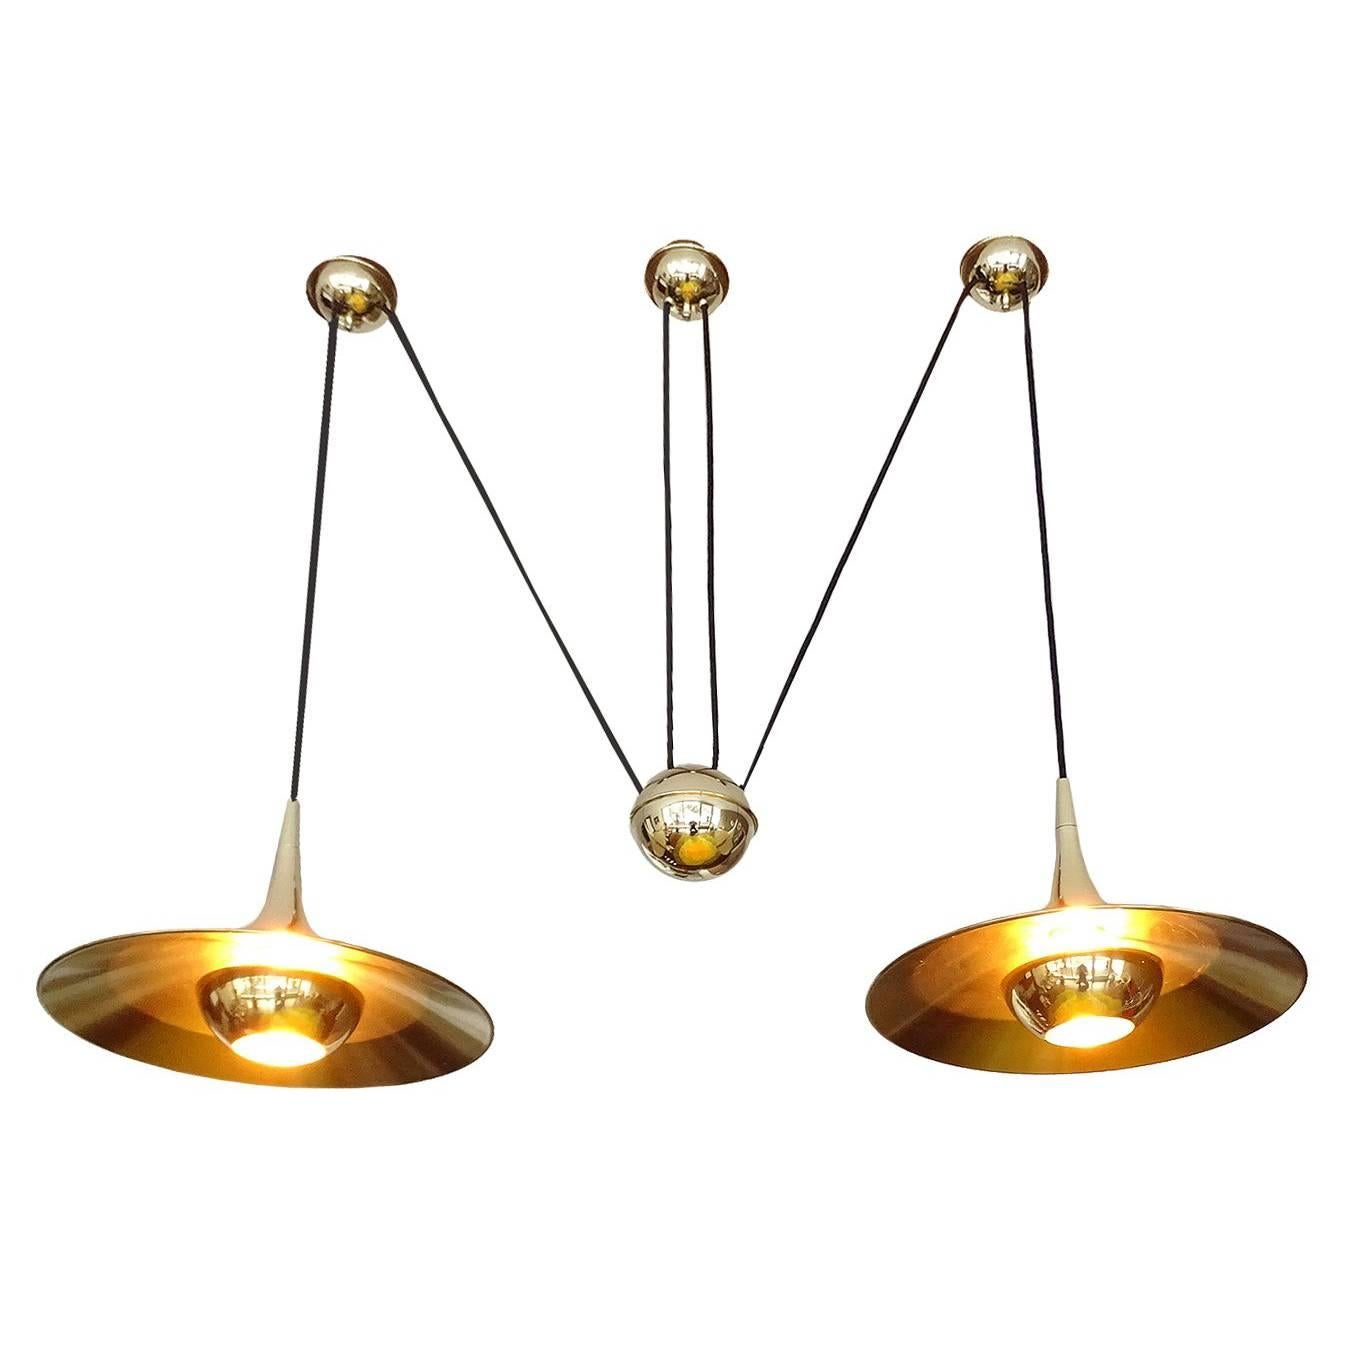 Very large dual brass chandelier pendant light with central adjustable pull counterweight, high end quality polished brass and matte finish inside the shade for smooth spread of the light, glare free construction with bulb hiding caps. The light can